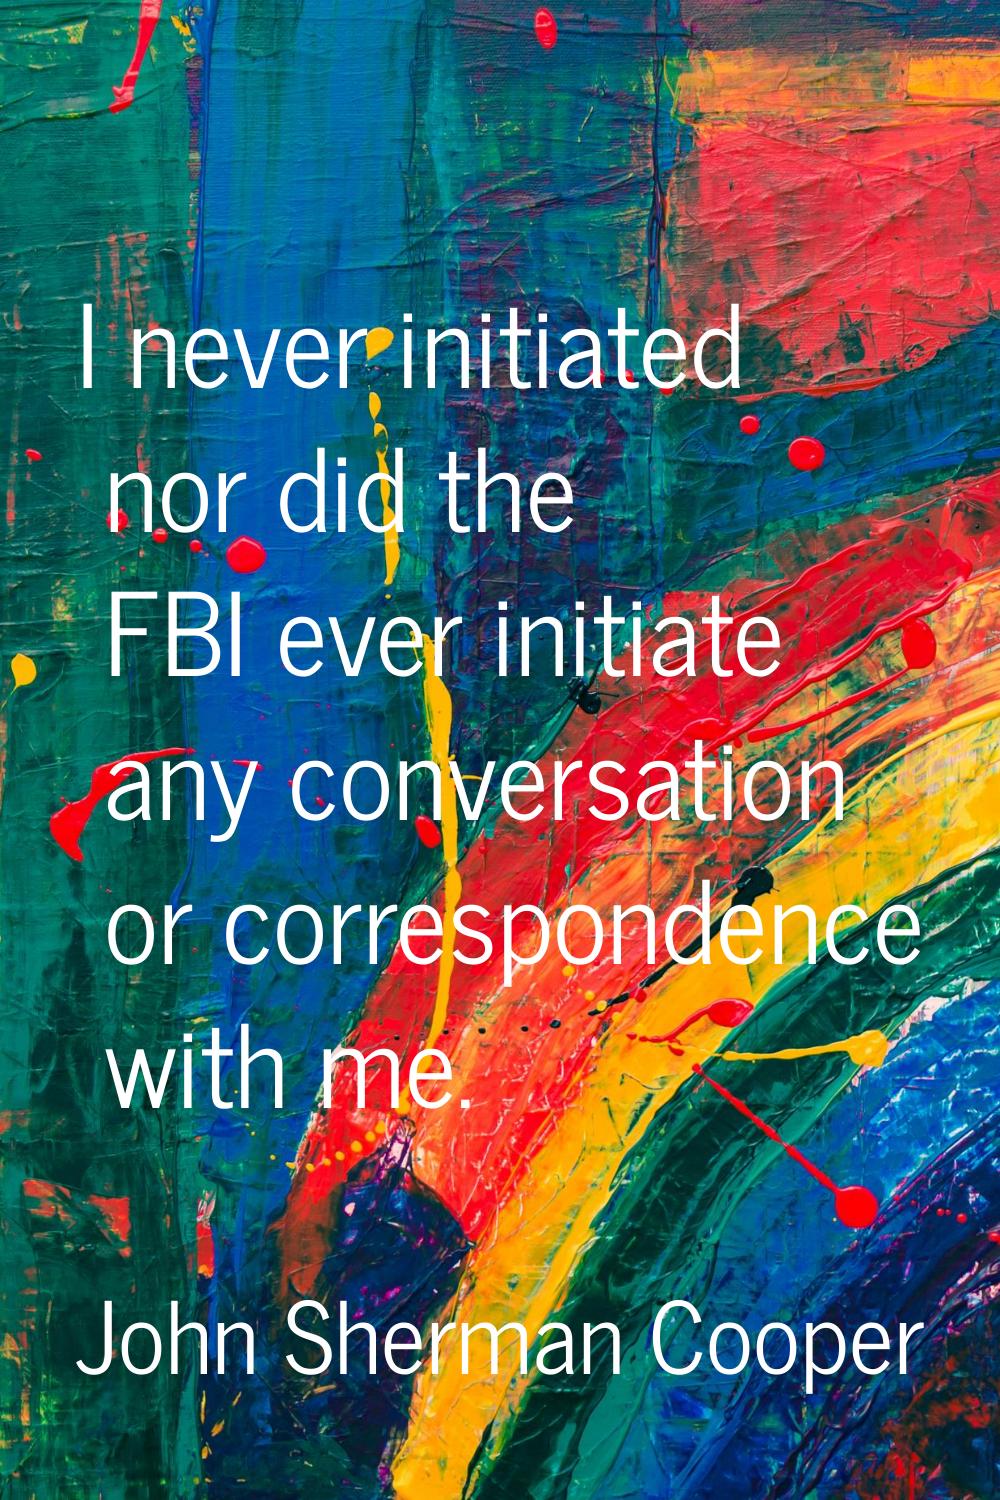 I never initiated nor did the FBI ever initiate any conversation or correspondence with me.